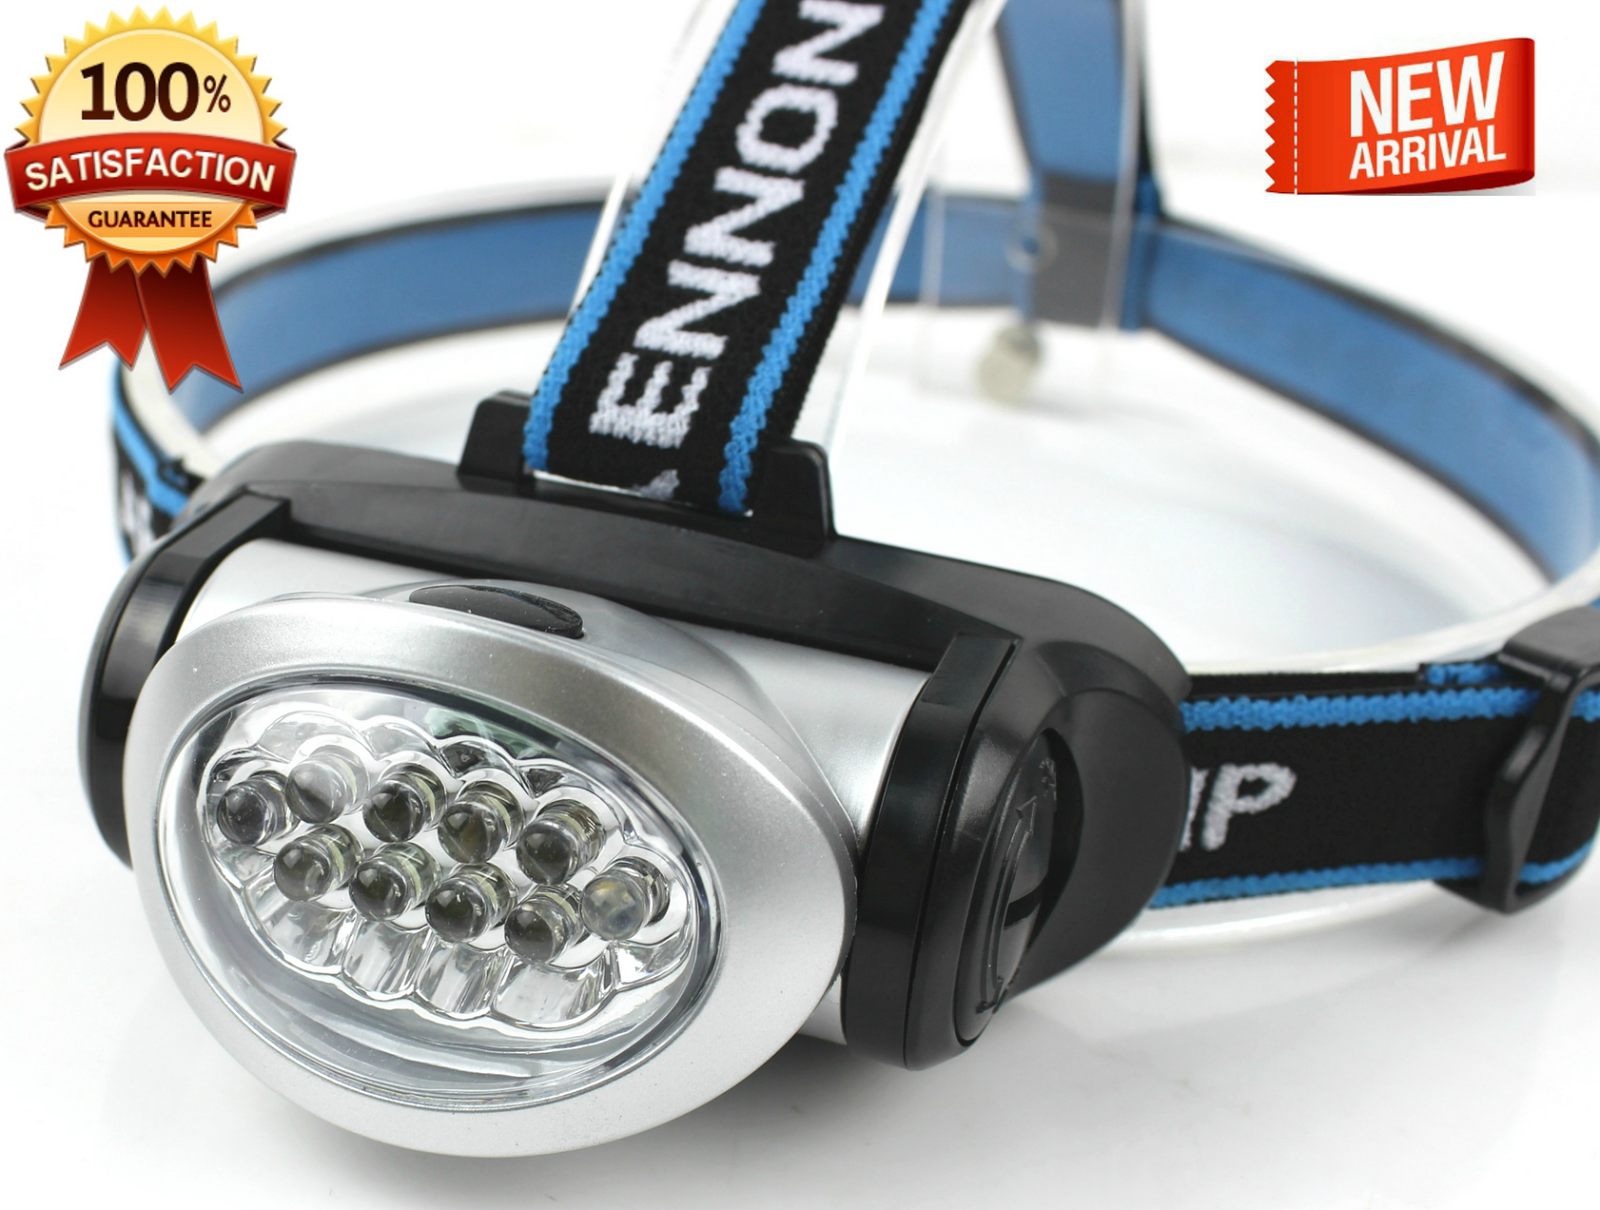 Multi functional Soft Light head Lamp. Headlight for the Boat. Led functions